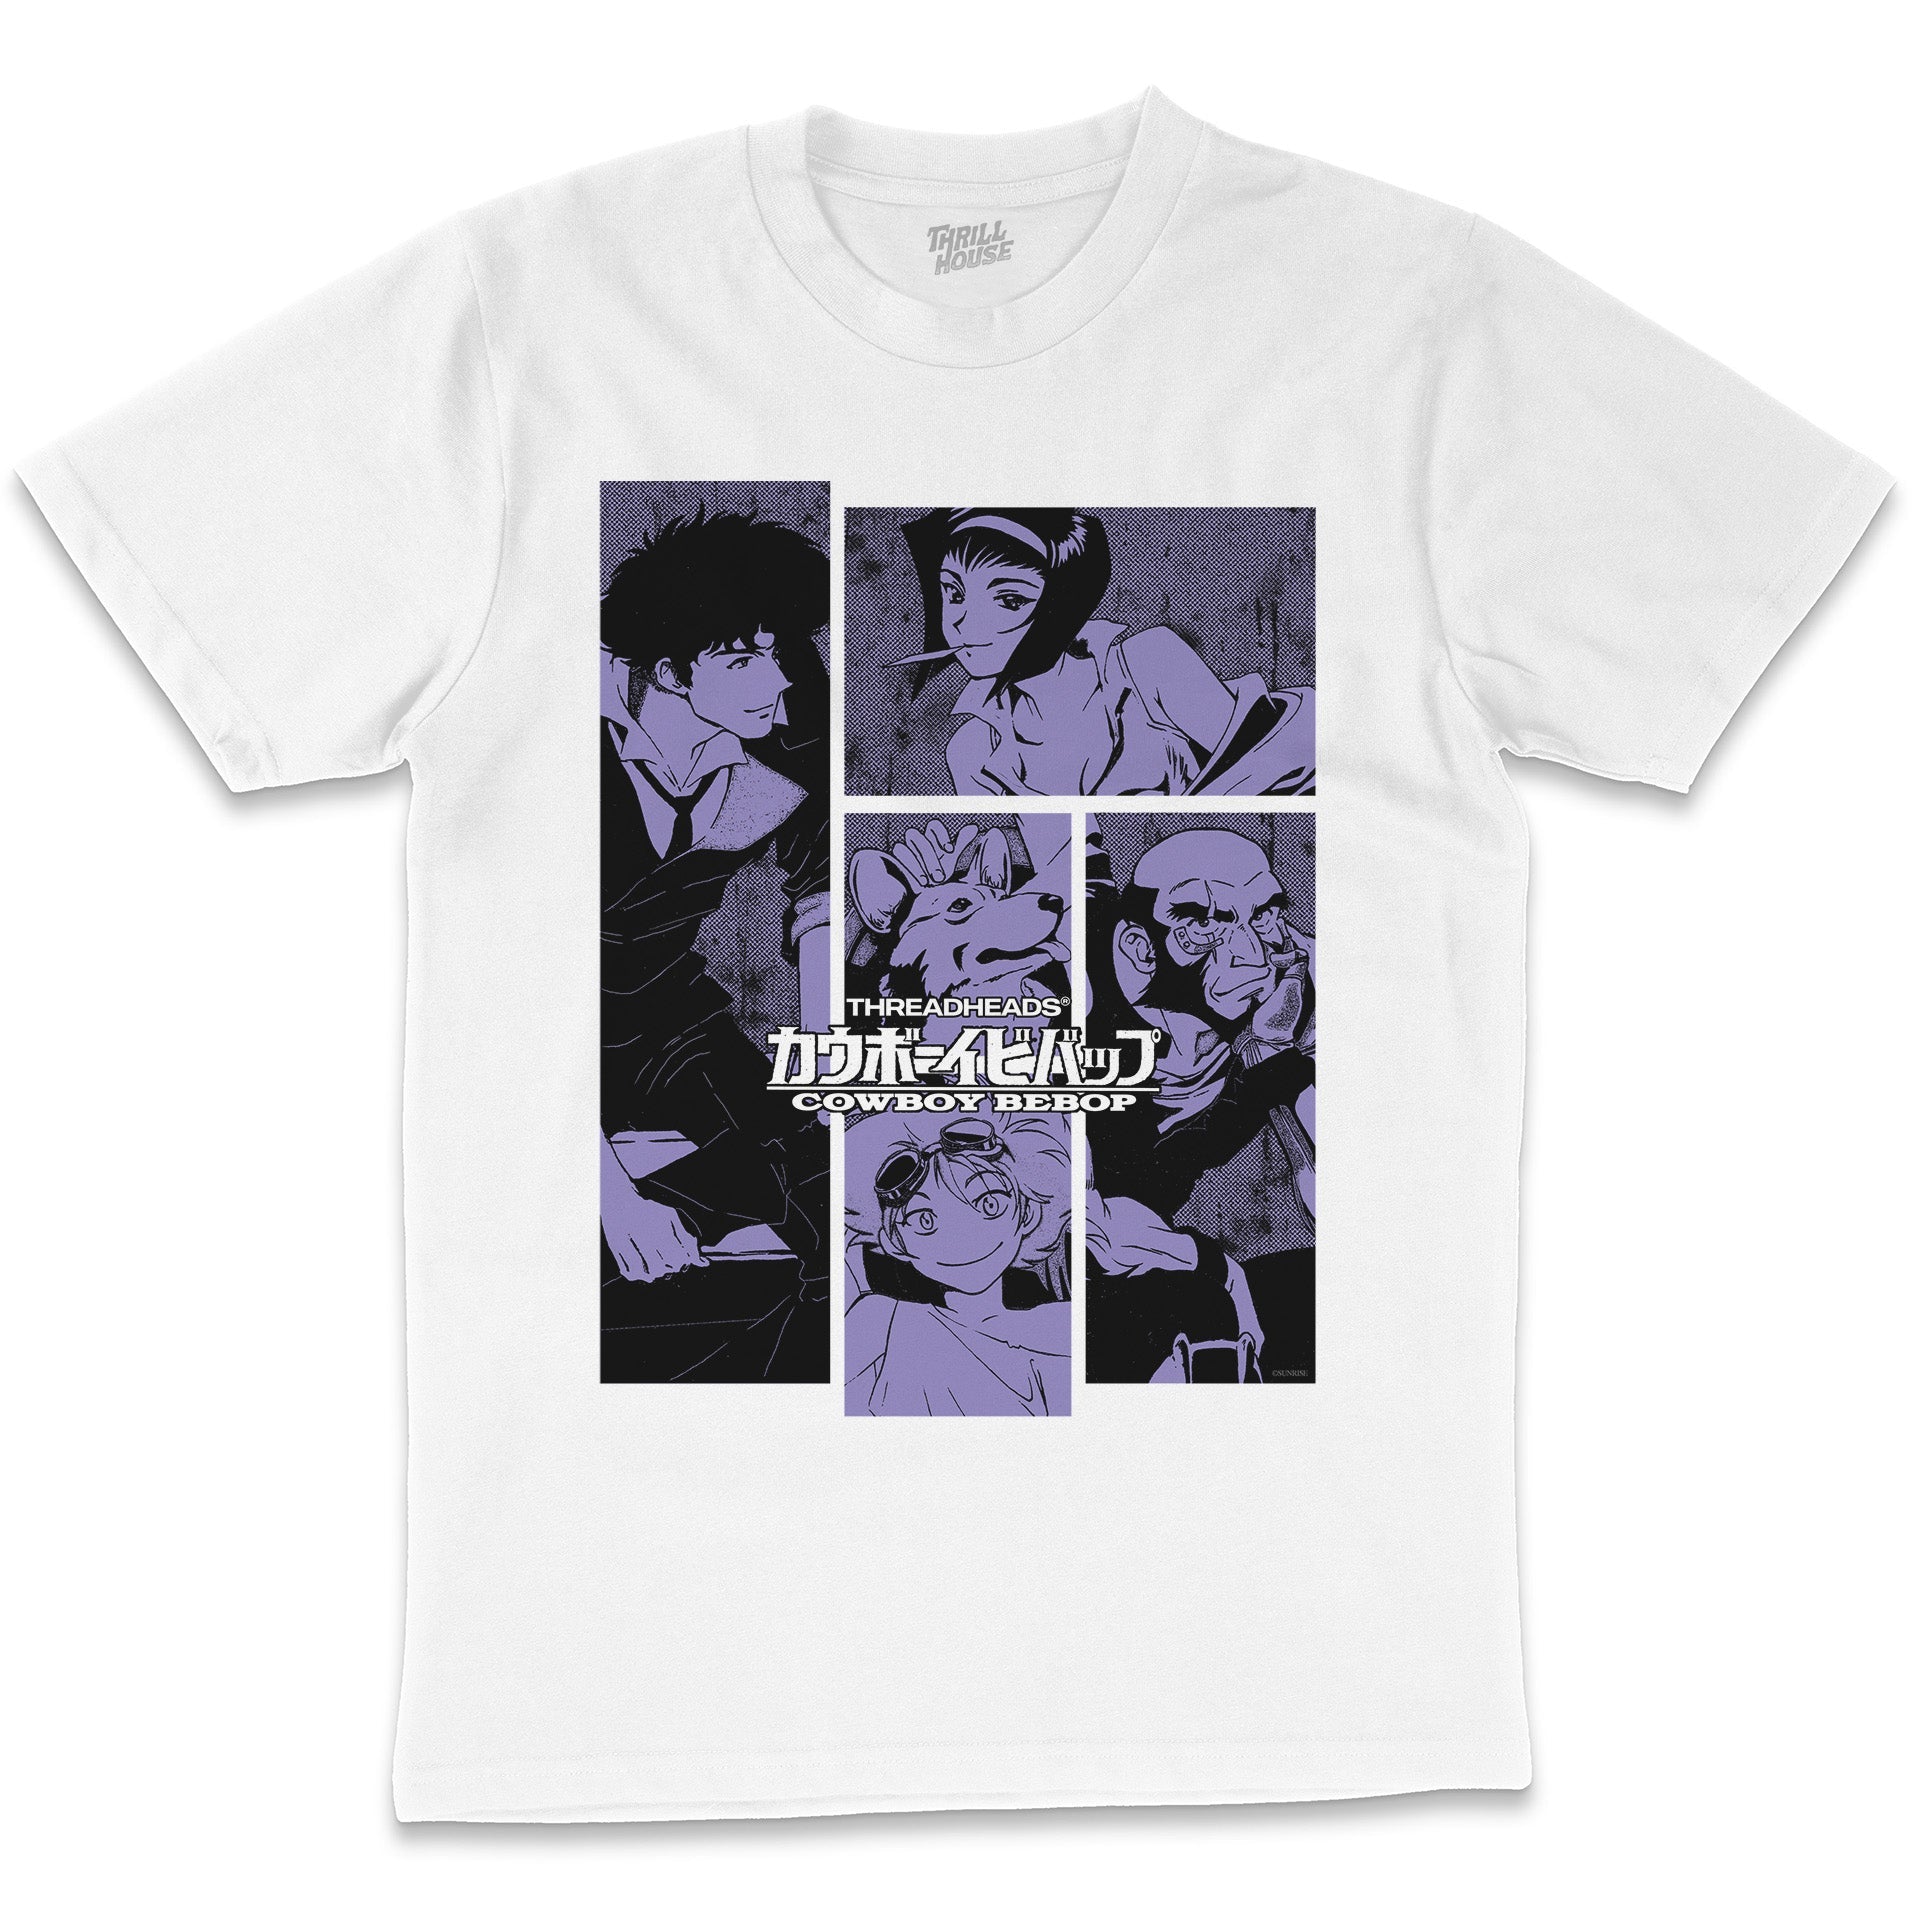 Cowboy Bebop The Gang Officially Licensed Japanese Anime Sci-Fi 90s Adventure Cartoon Cotton T-Shirt